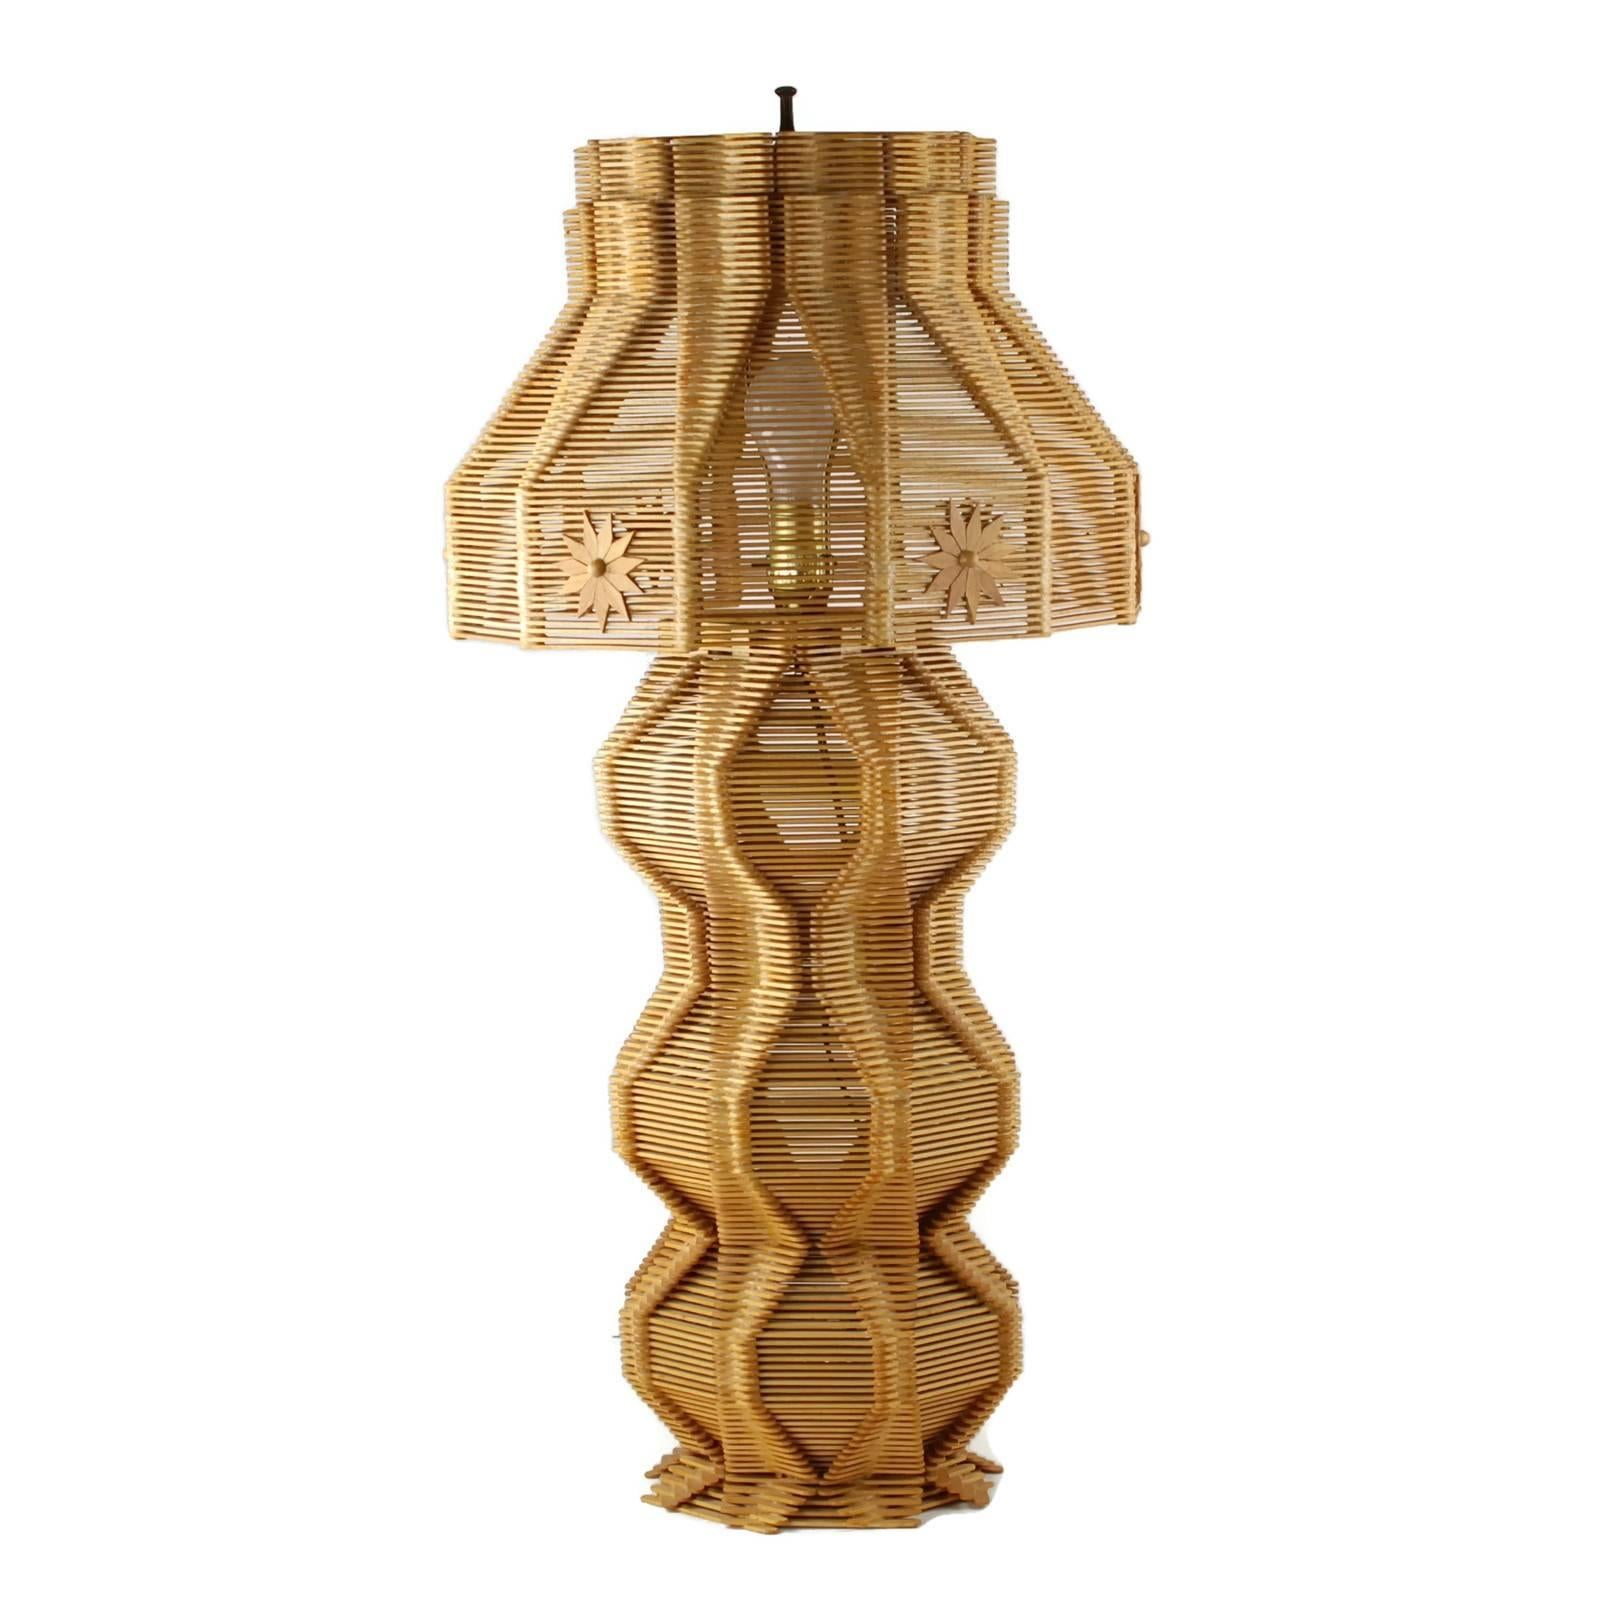 This large handmade Folk Art table lamp and matched shade are composed of popsicle sticks which have been arranged in a highly detailed geometric pattern. The lamp base has a sculptural quality with three ovoid sections located atop an octagonal